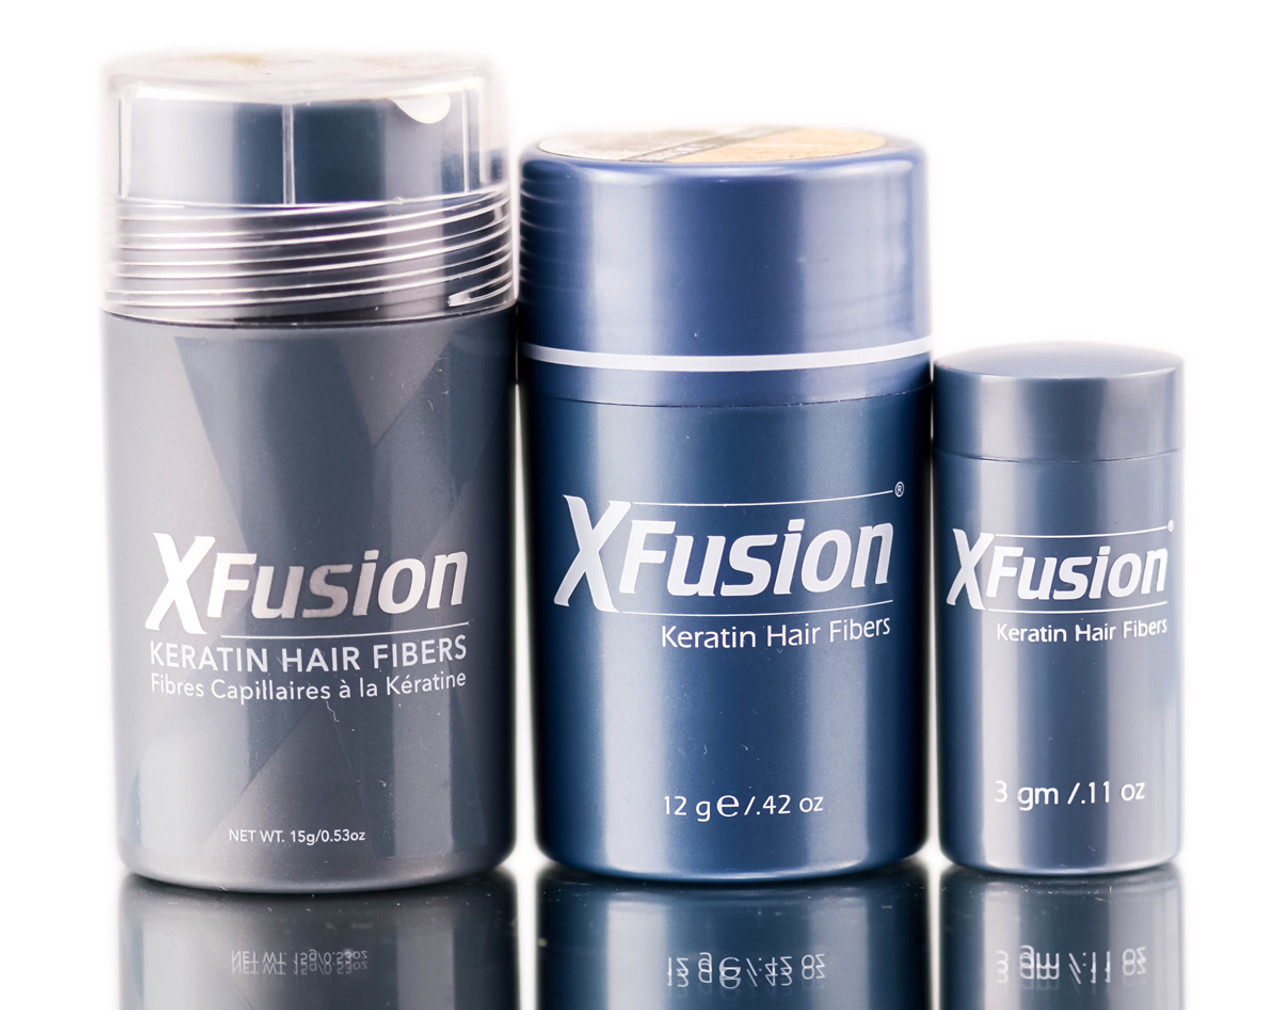 5. XFusion Keratin Hair Fibers for Blondes - wide 4